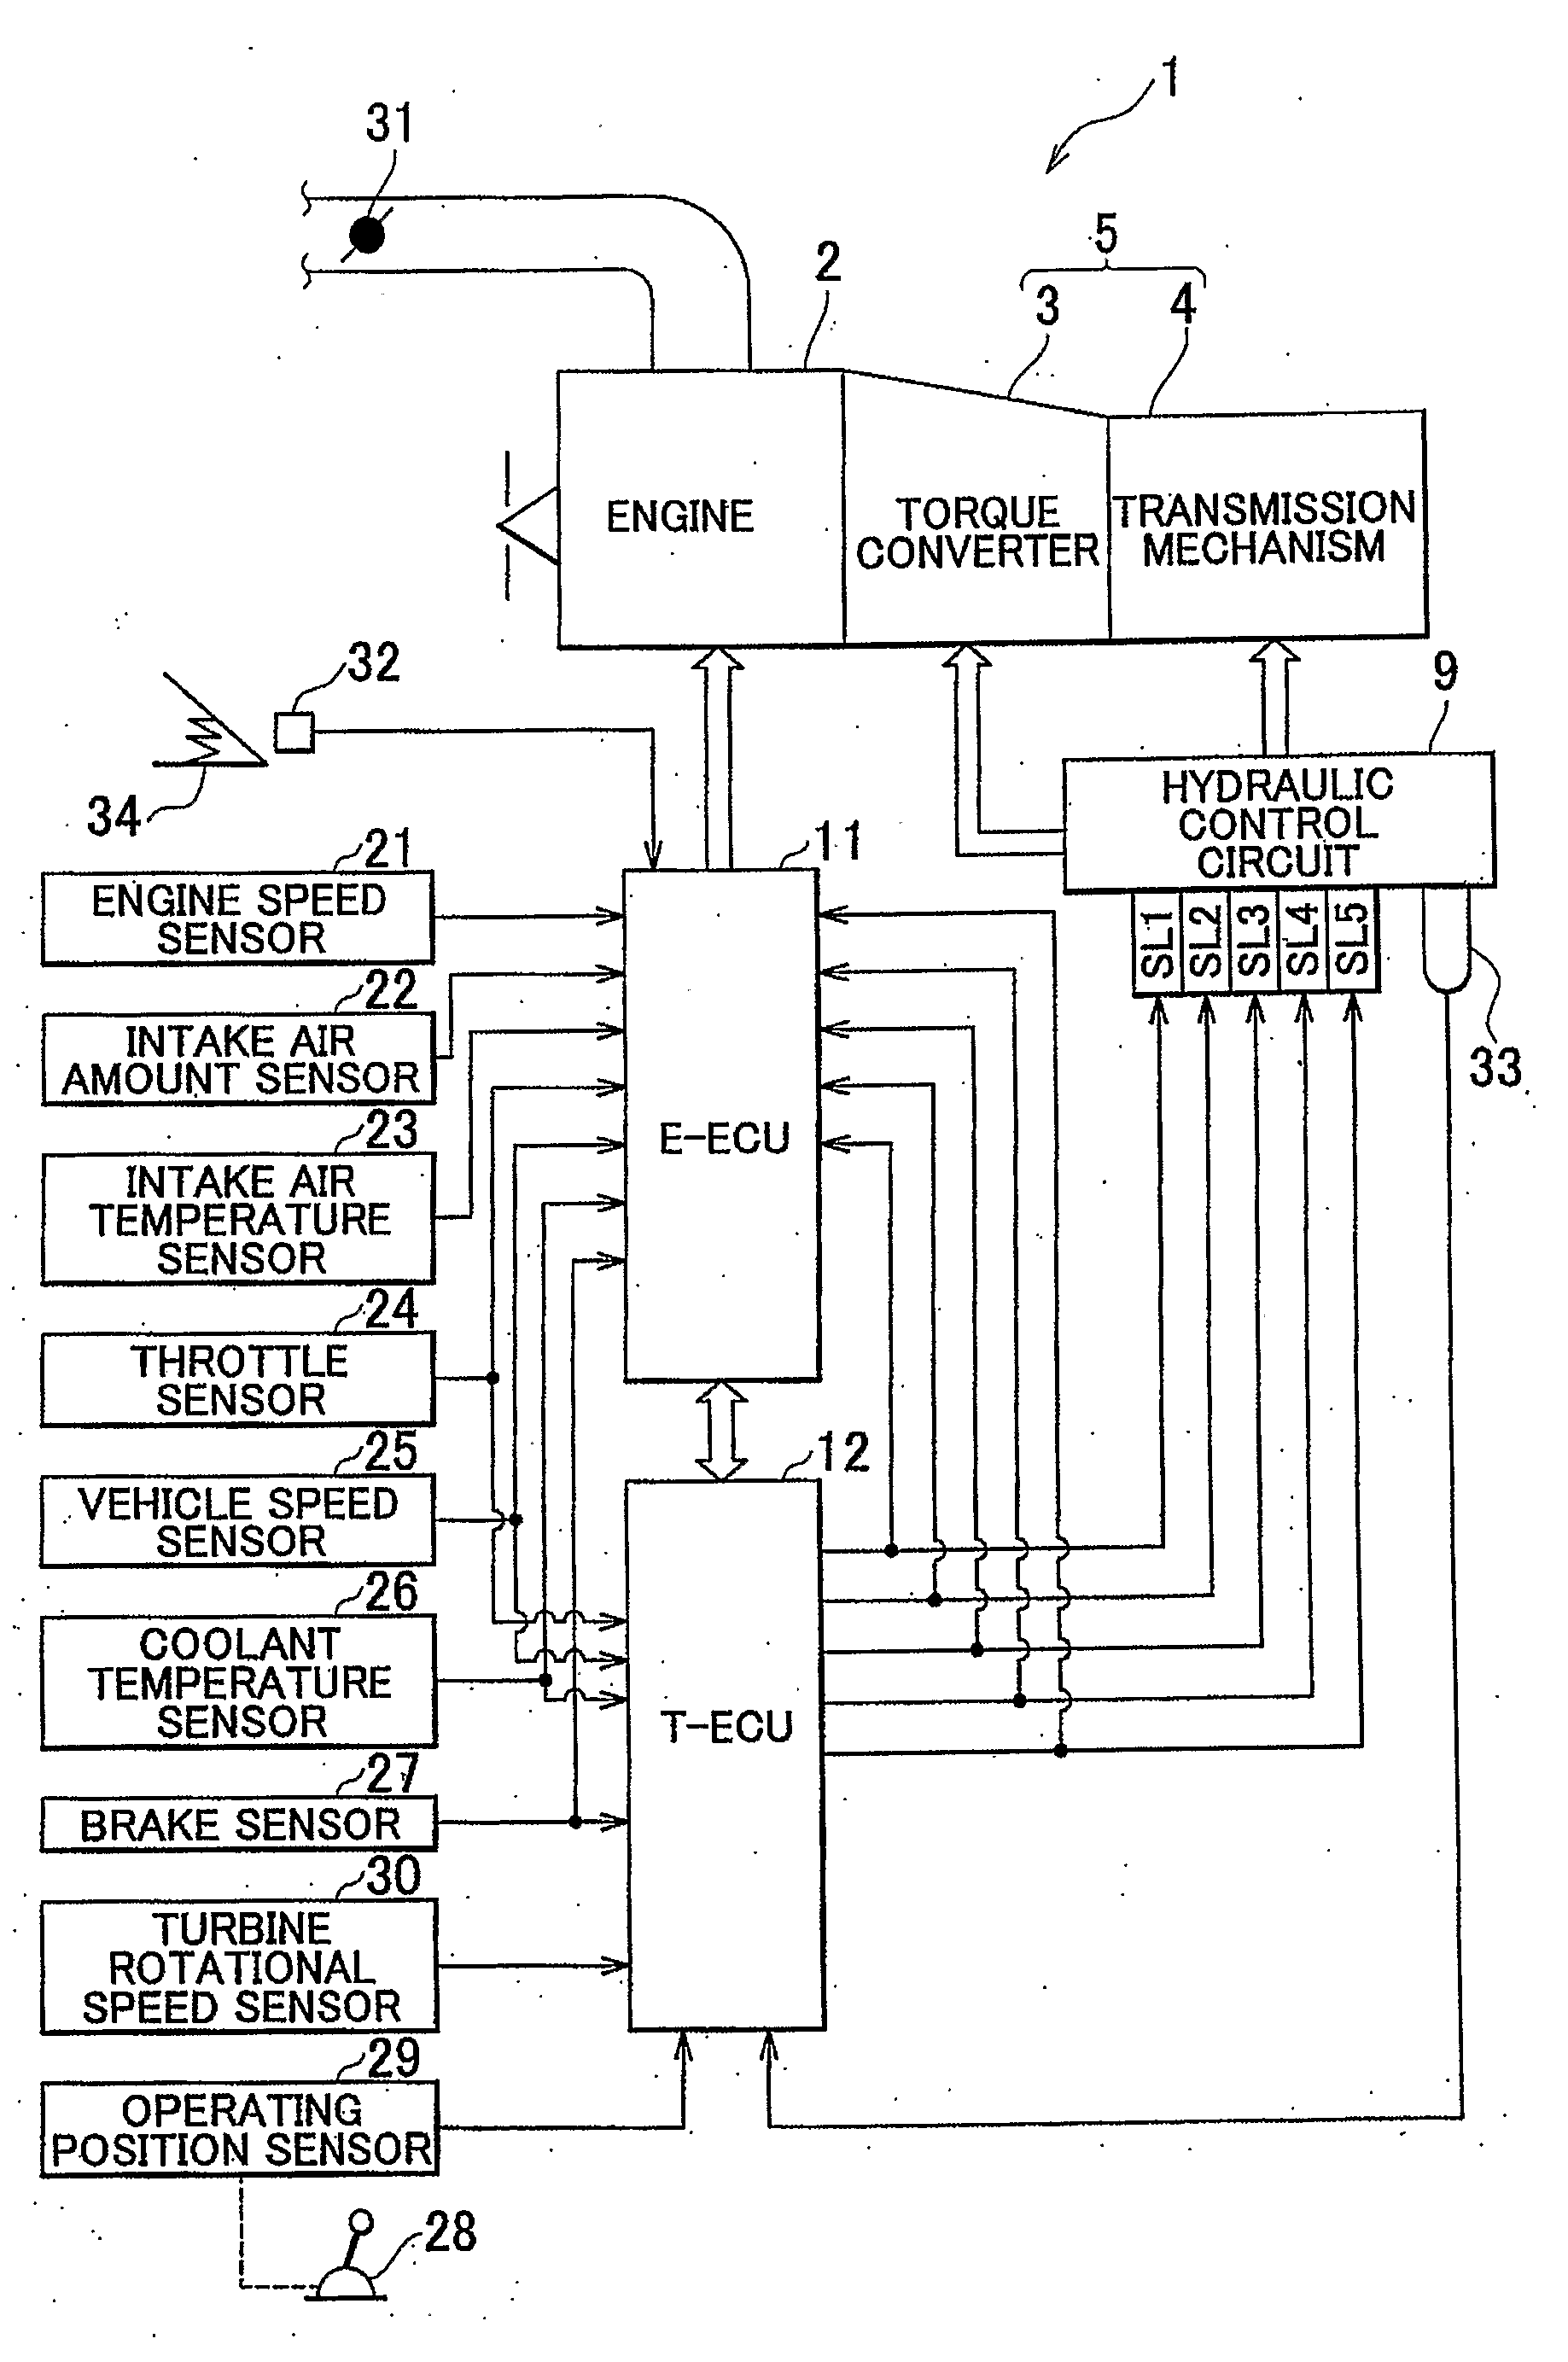 Control device for an automatic transmission